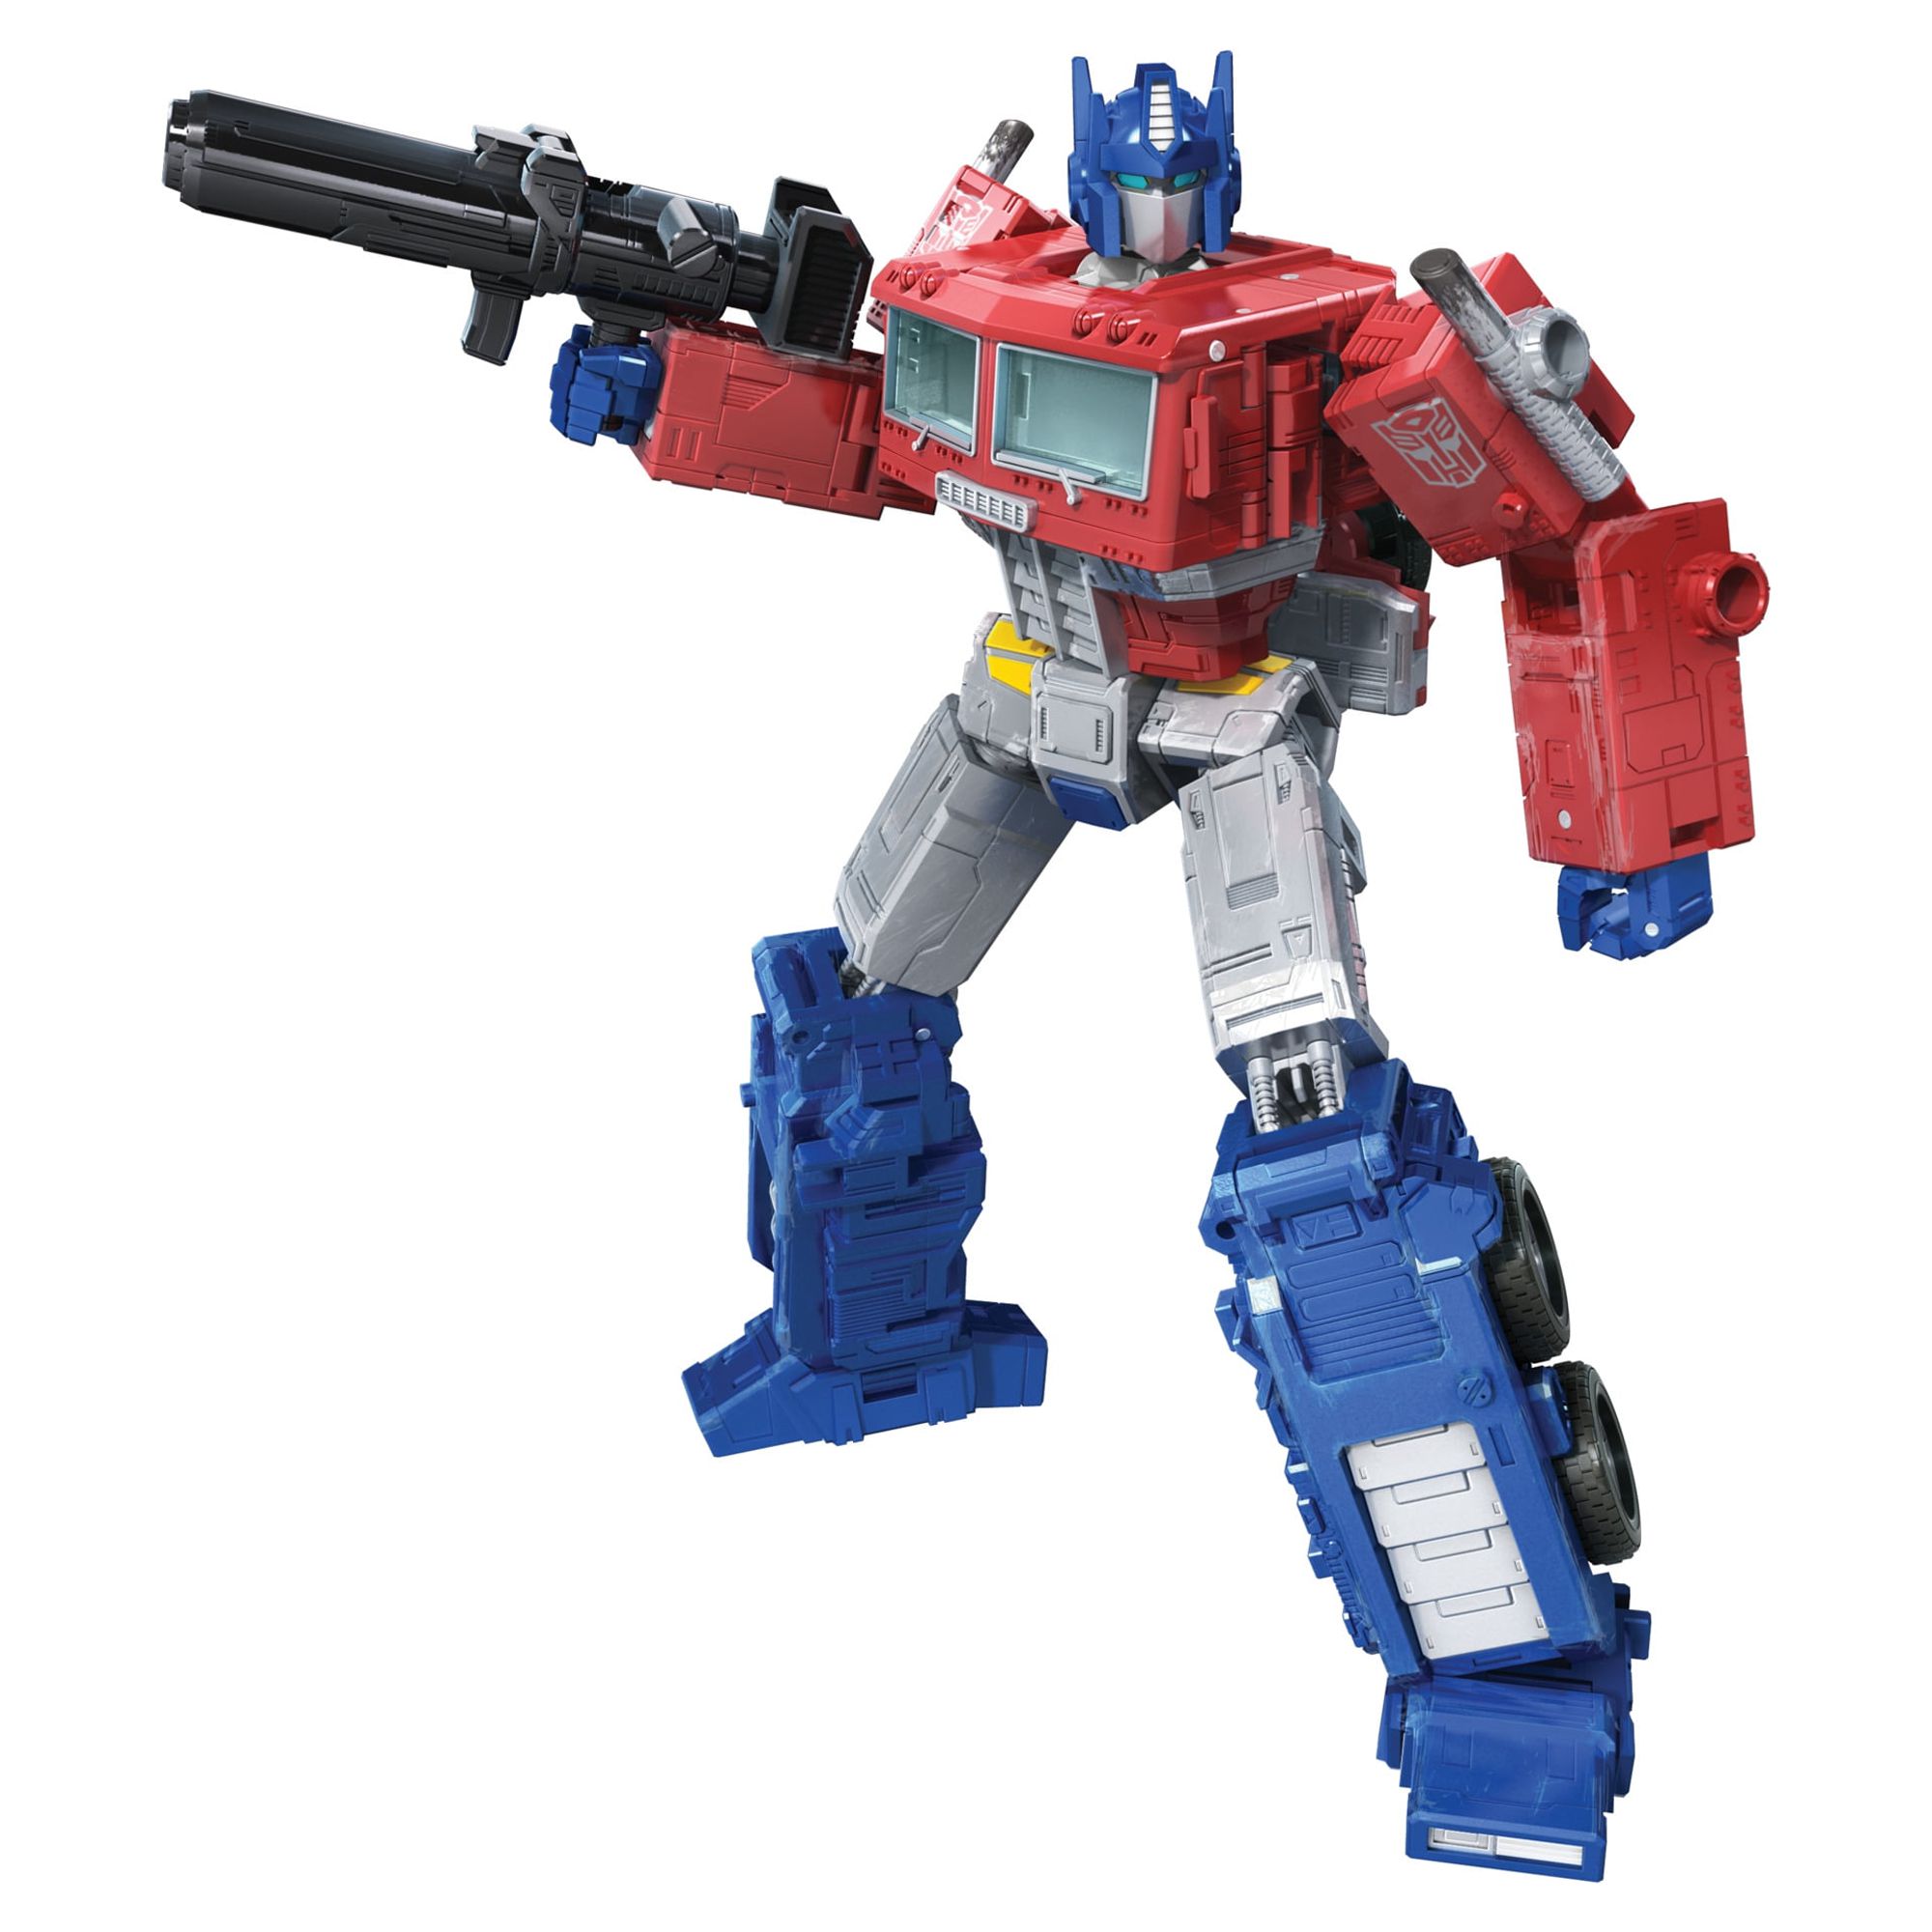 Transformers: War for Cybertron Optimus Prime Kids Toy Action Figure for Boys and Girls (7") - image 1 of 6